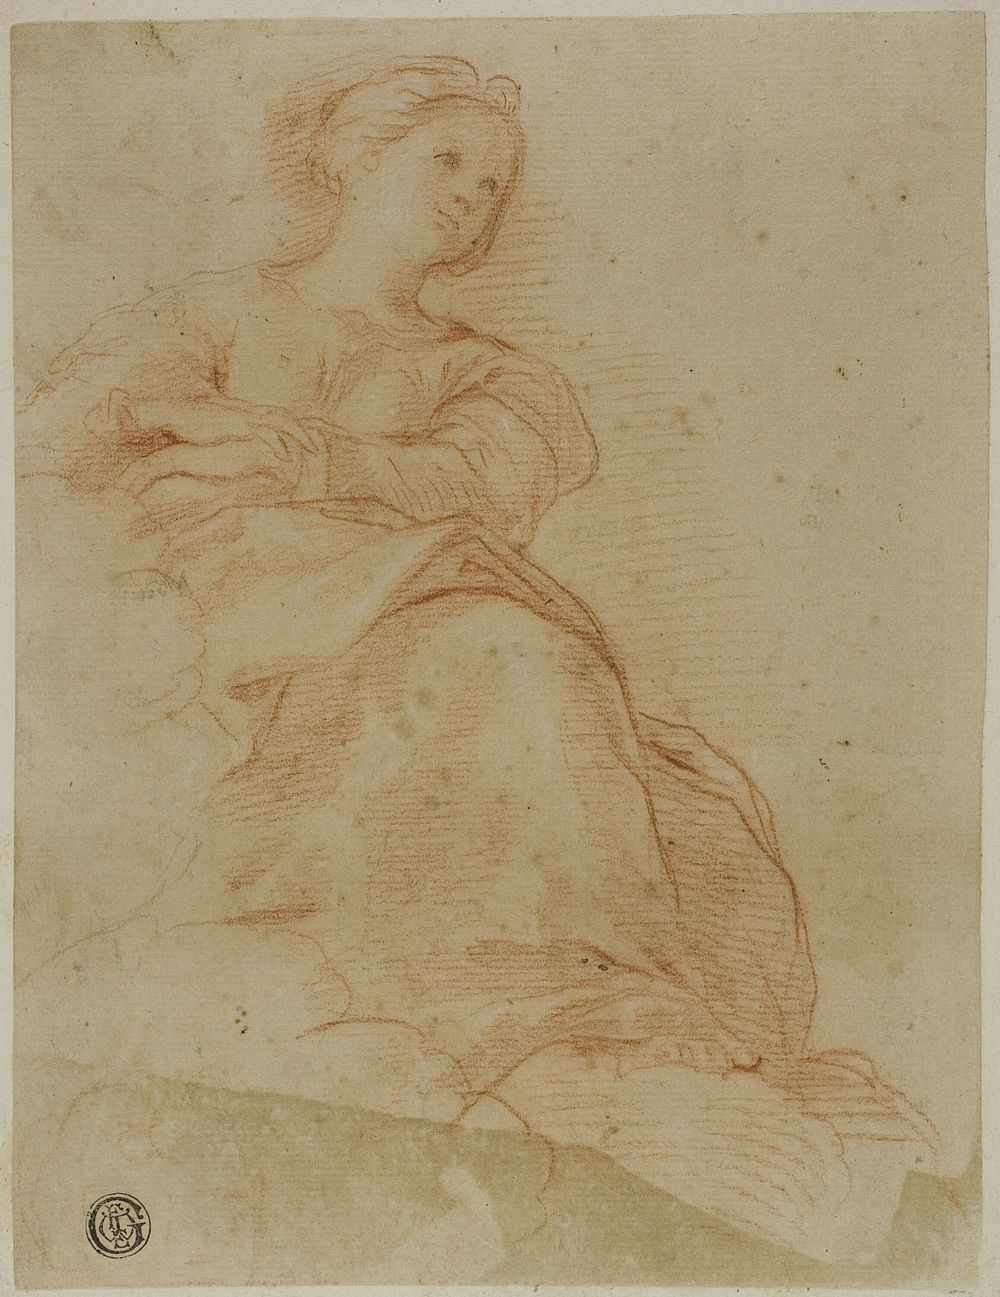 Woman Seated on Clouds by Cristoforo Roncalli